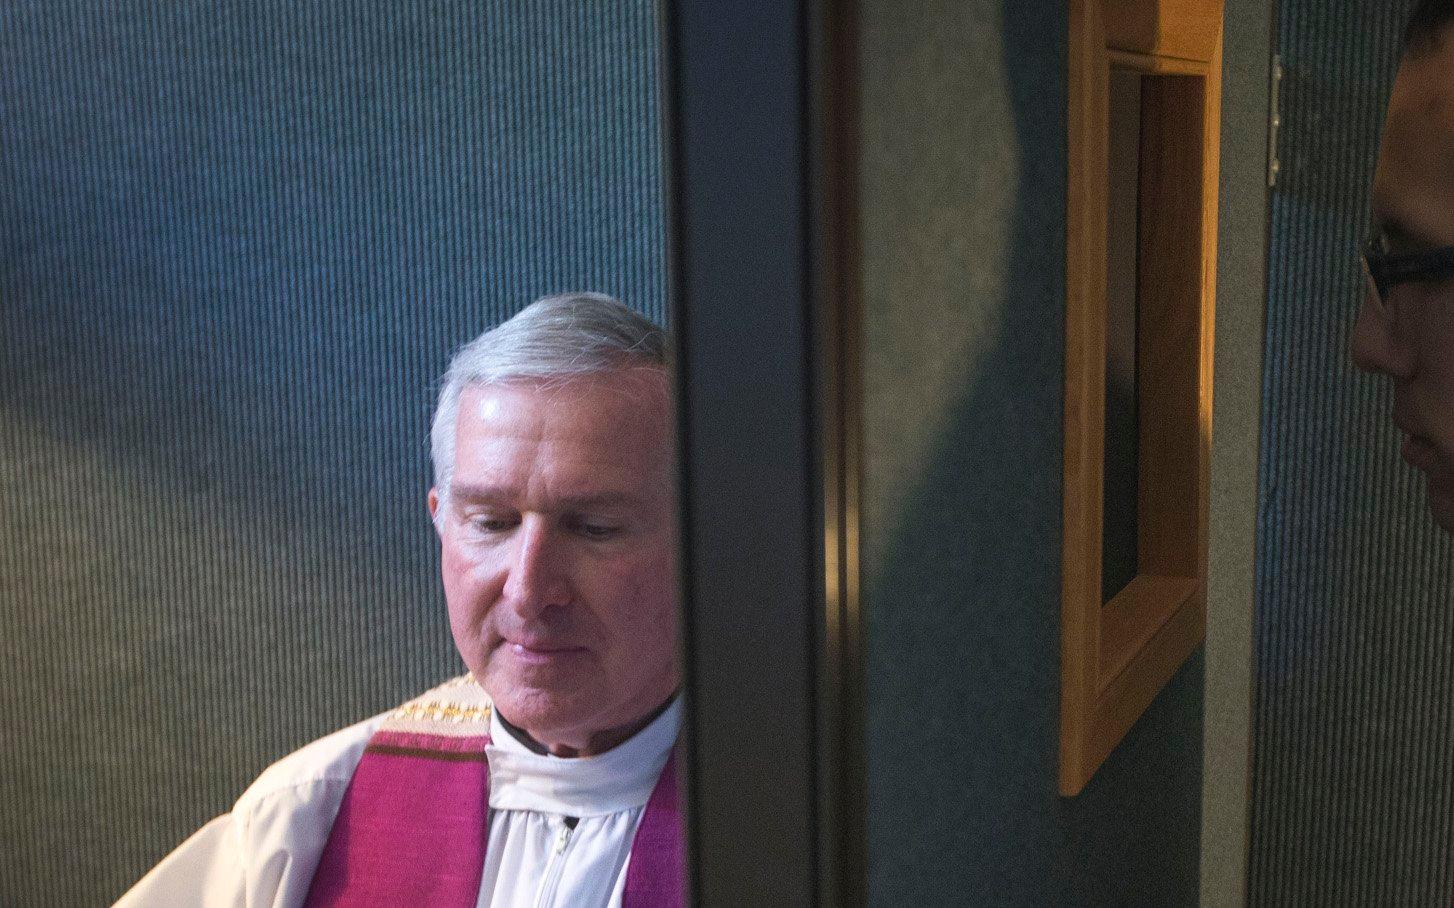 The Seal of Confession could be latest casualty of sex abuse crisis